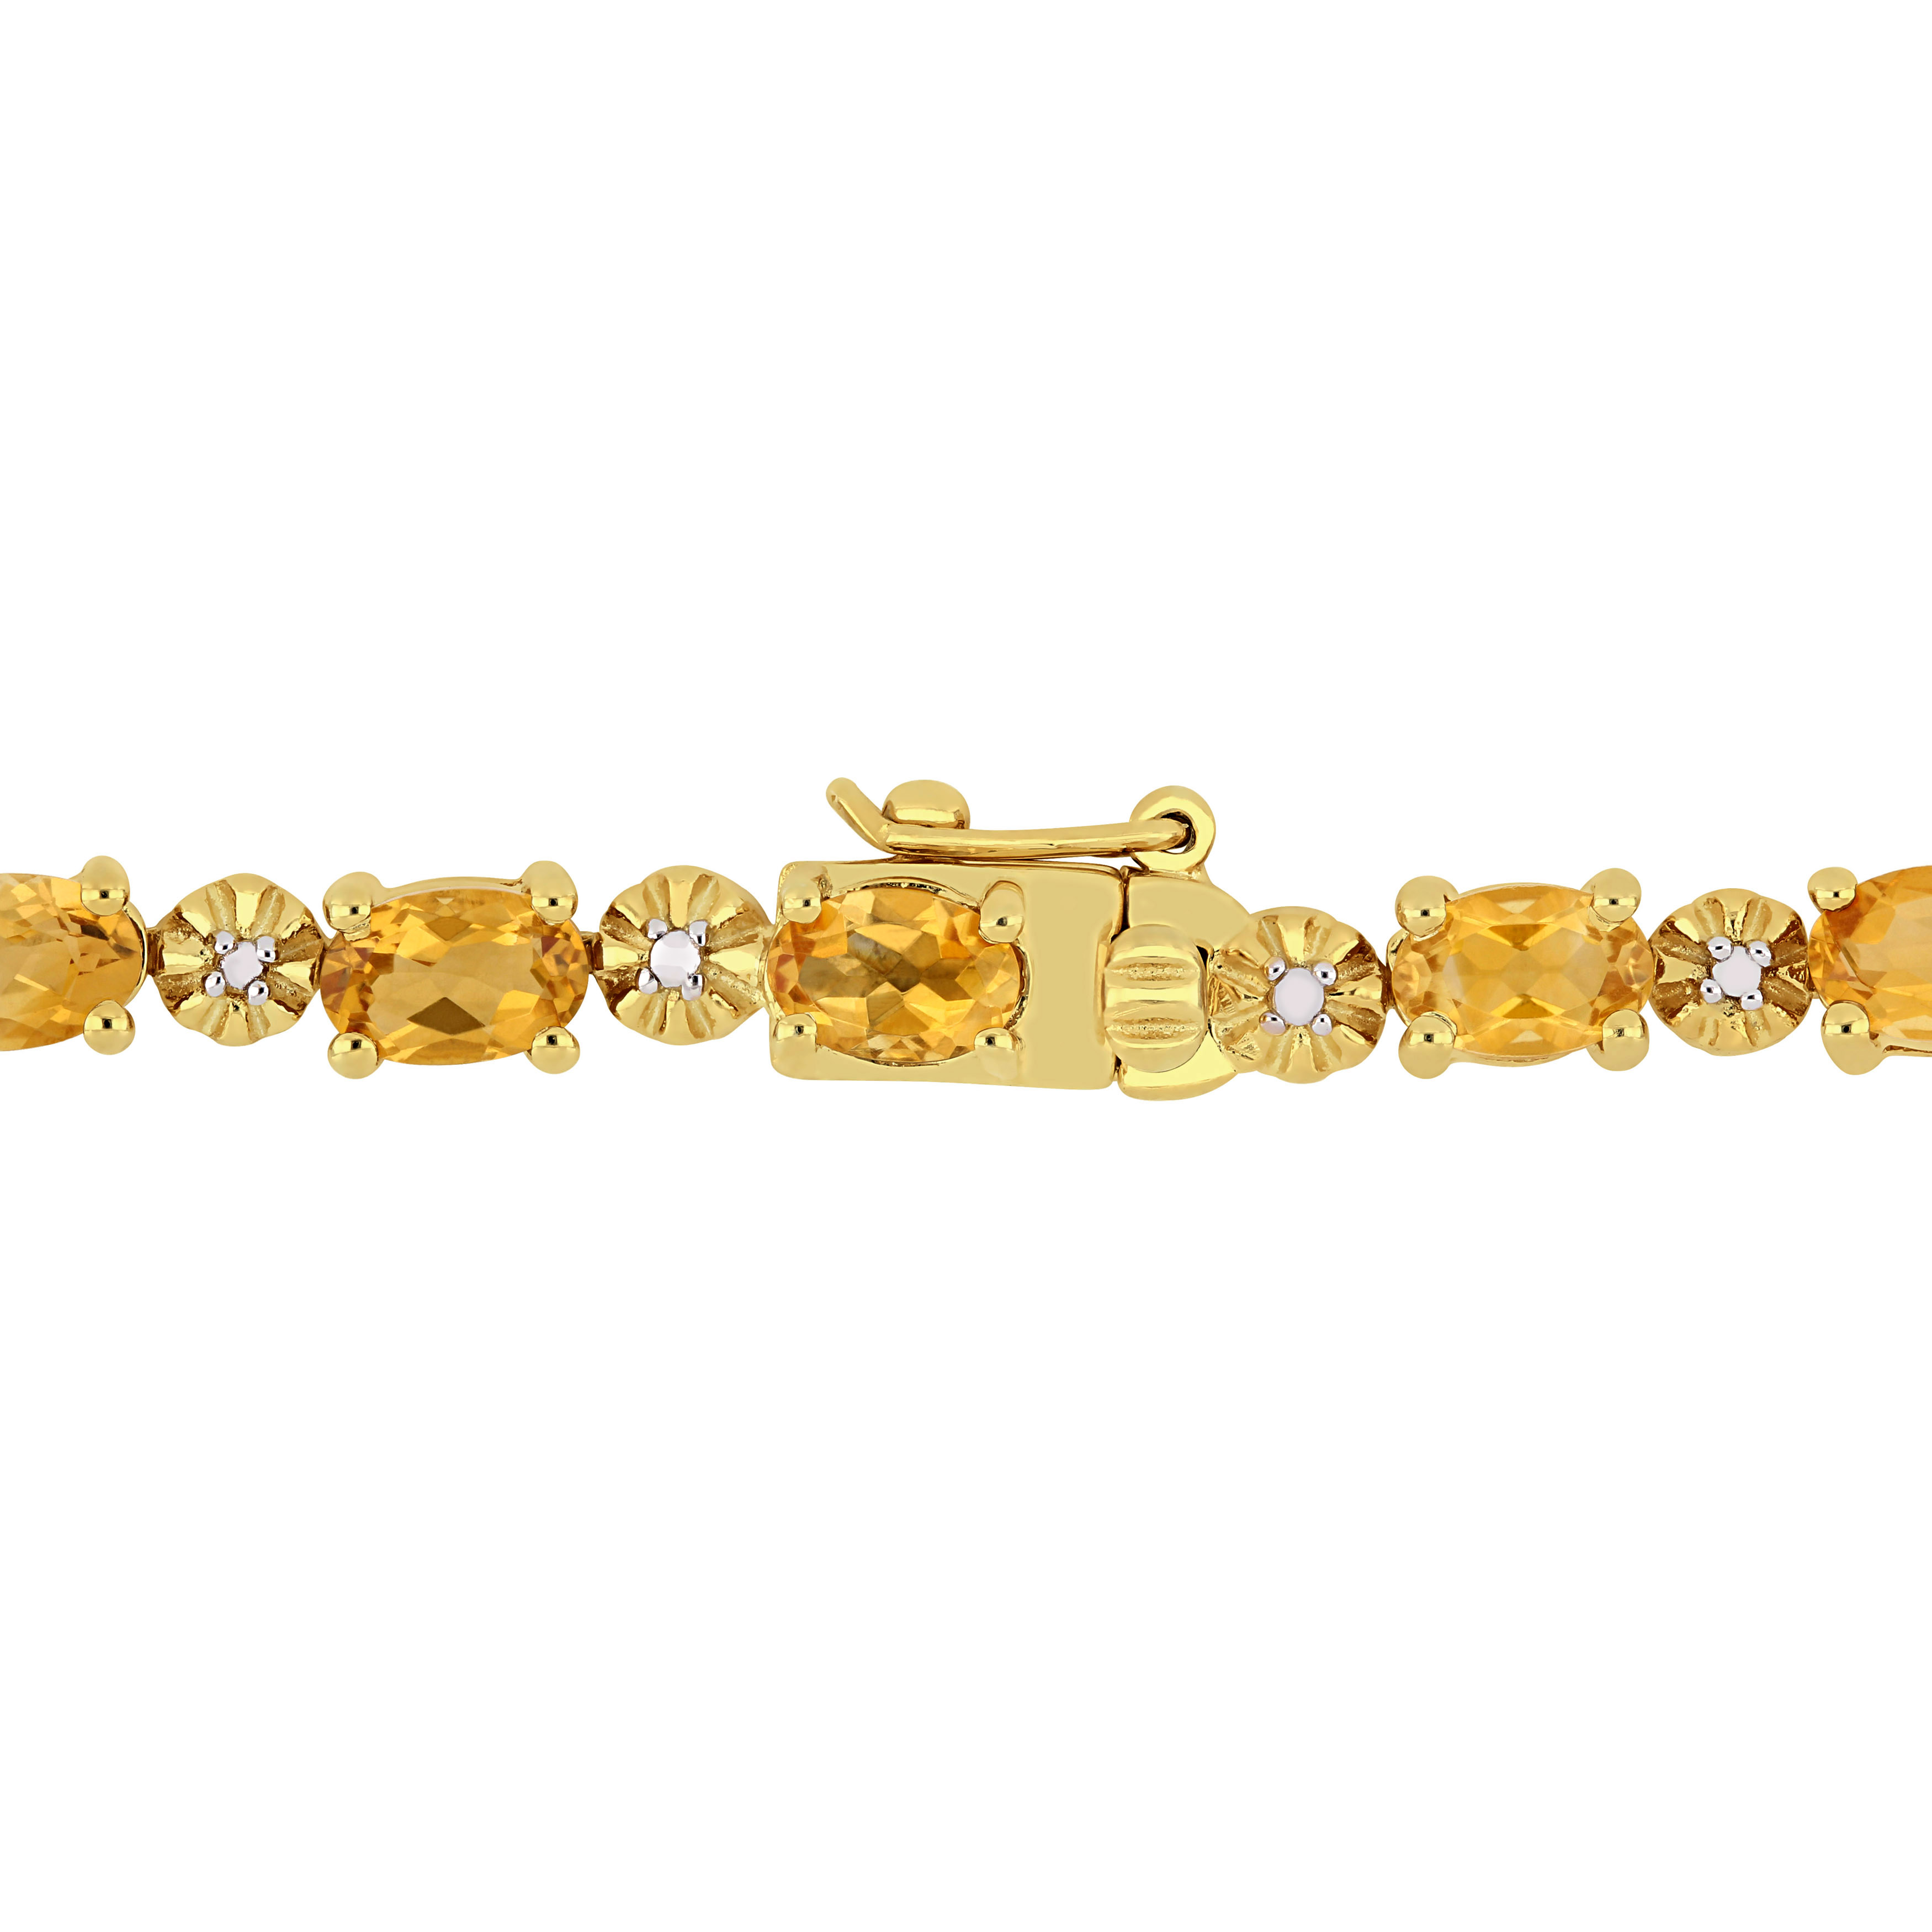 8 1/10 CT TGW Oval-Cut Citrine and Diamond Accent Tennis Bracelet in Yellow Plated Sterling Silver - 7.25 in.